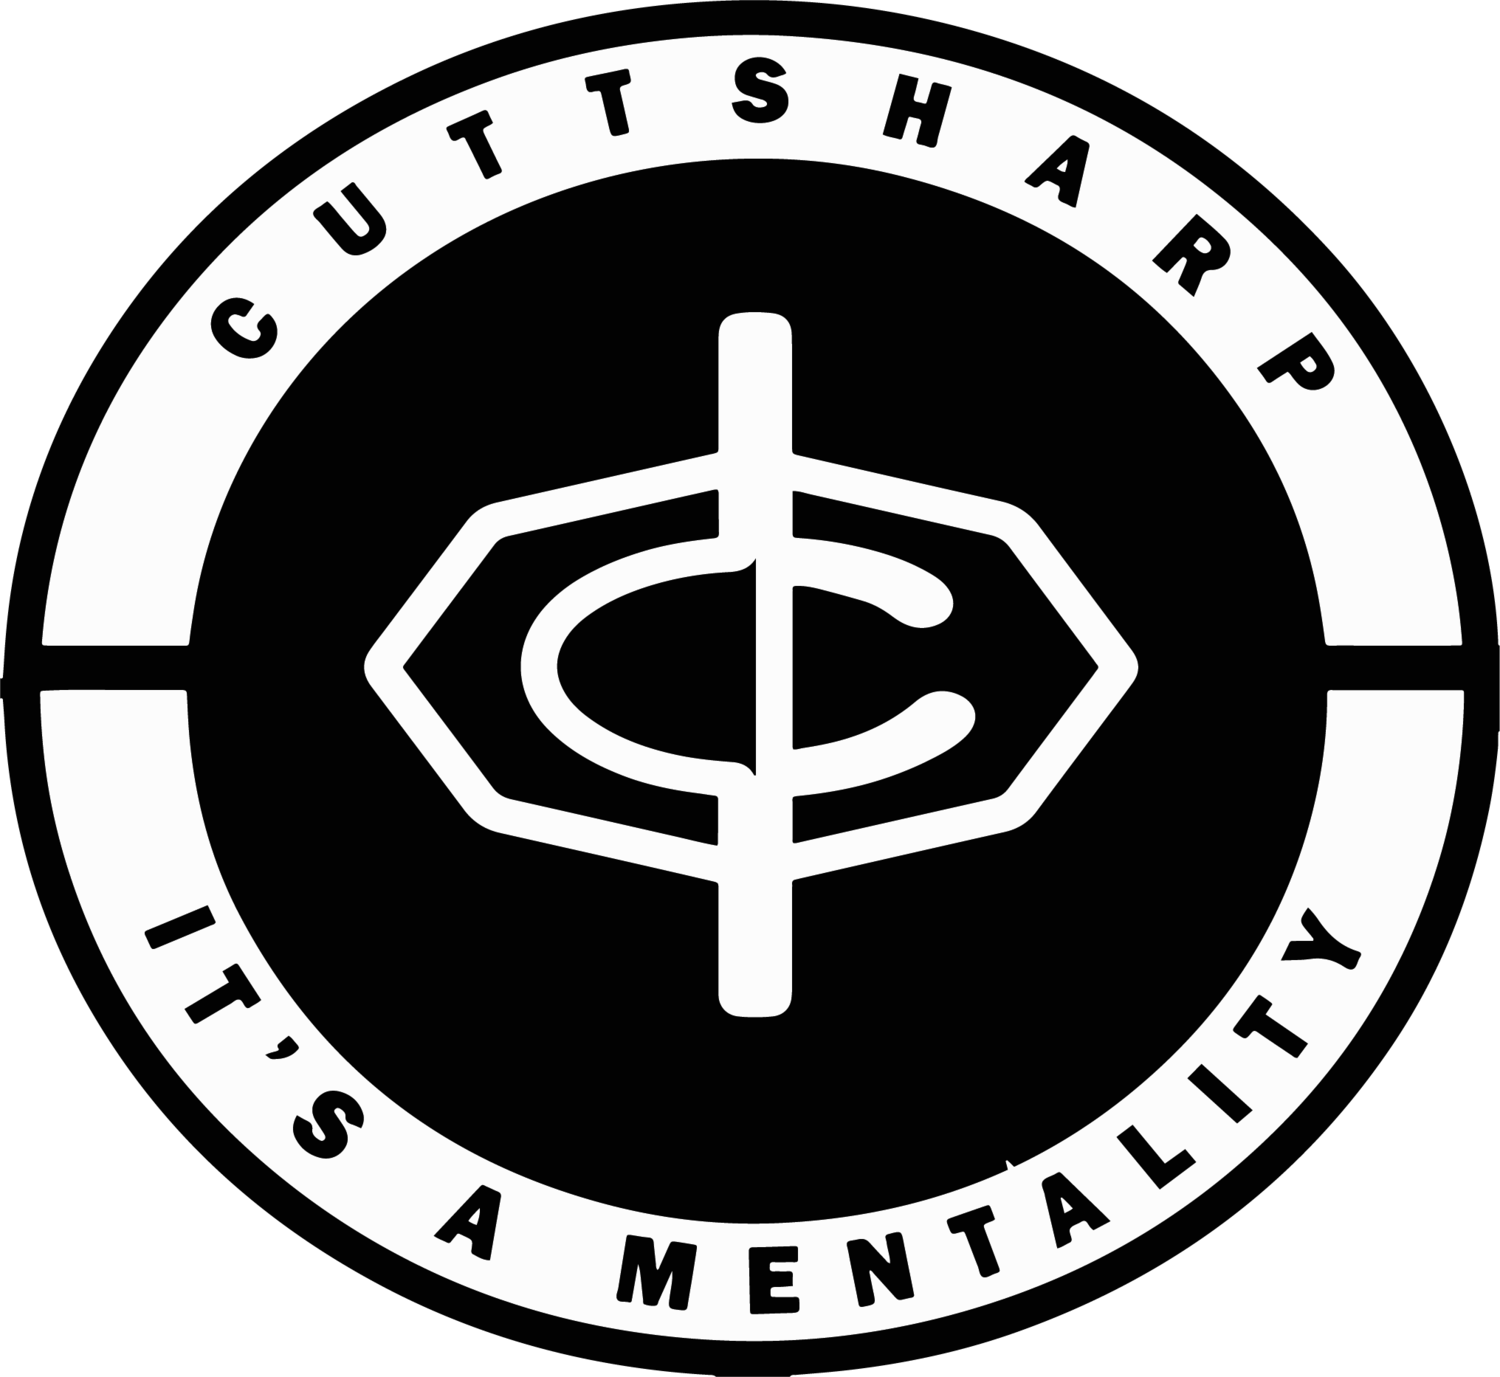 CuttSharp Productions